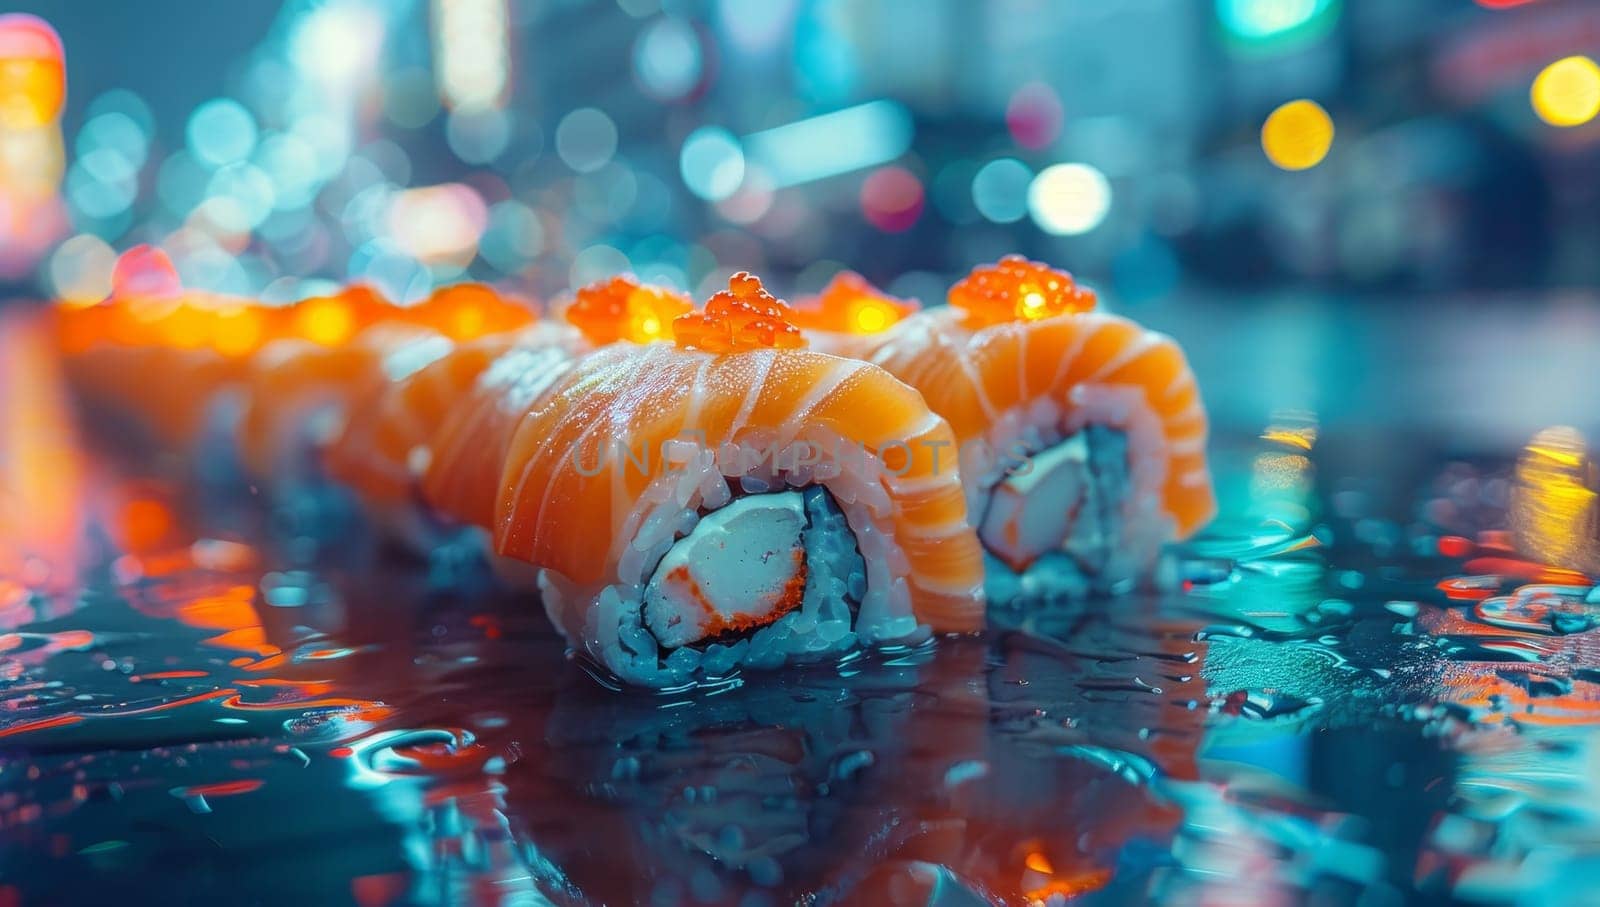 Sushi Roll Adorned with Red Caviar on Reflective Surface